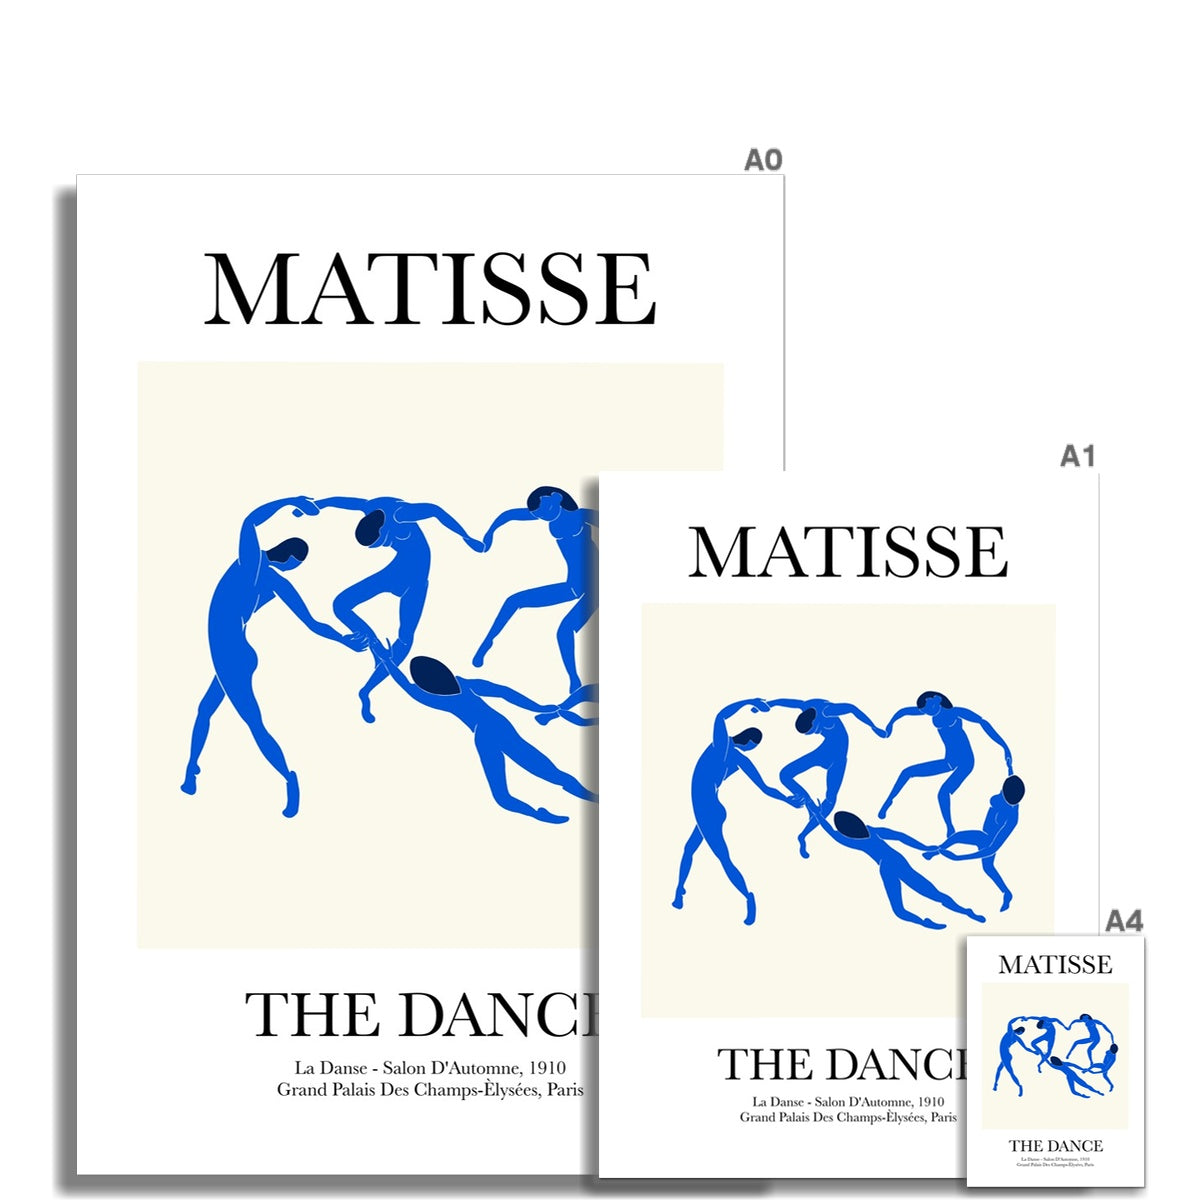 © les muses / Matisse wall art prints featuring nude figure cut outs or "Papiers Découpés" in a danish pastel style. Matisse exhibition posters with paper cut-outs. Berggruen & Cie museum prints for your gallery wall.
